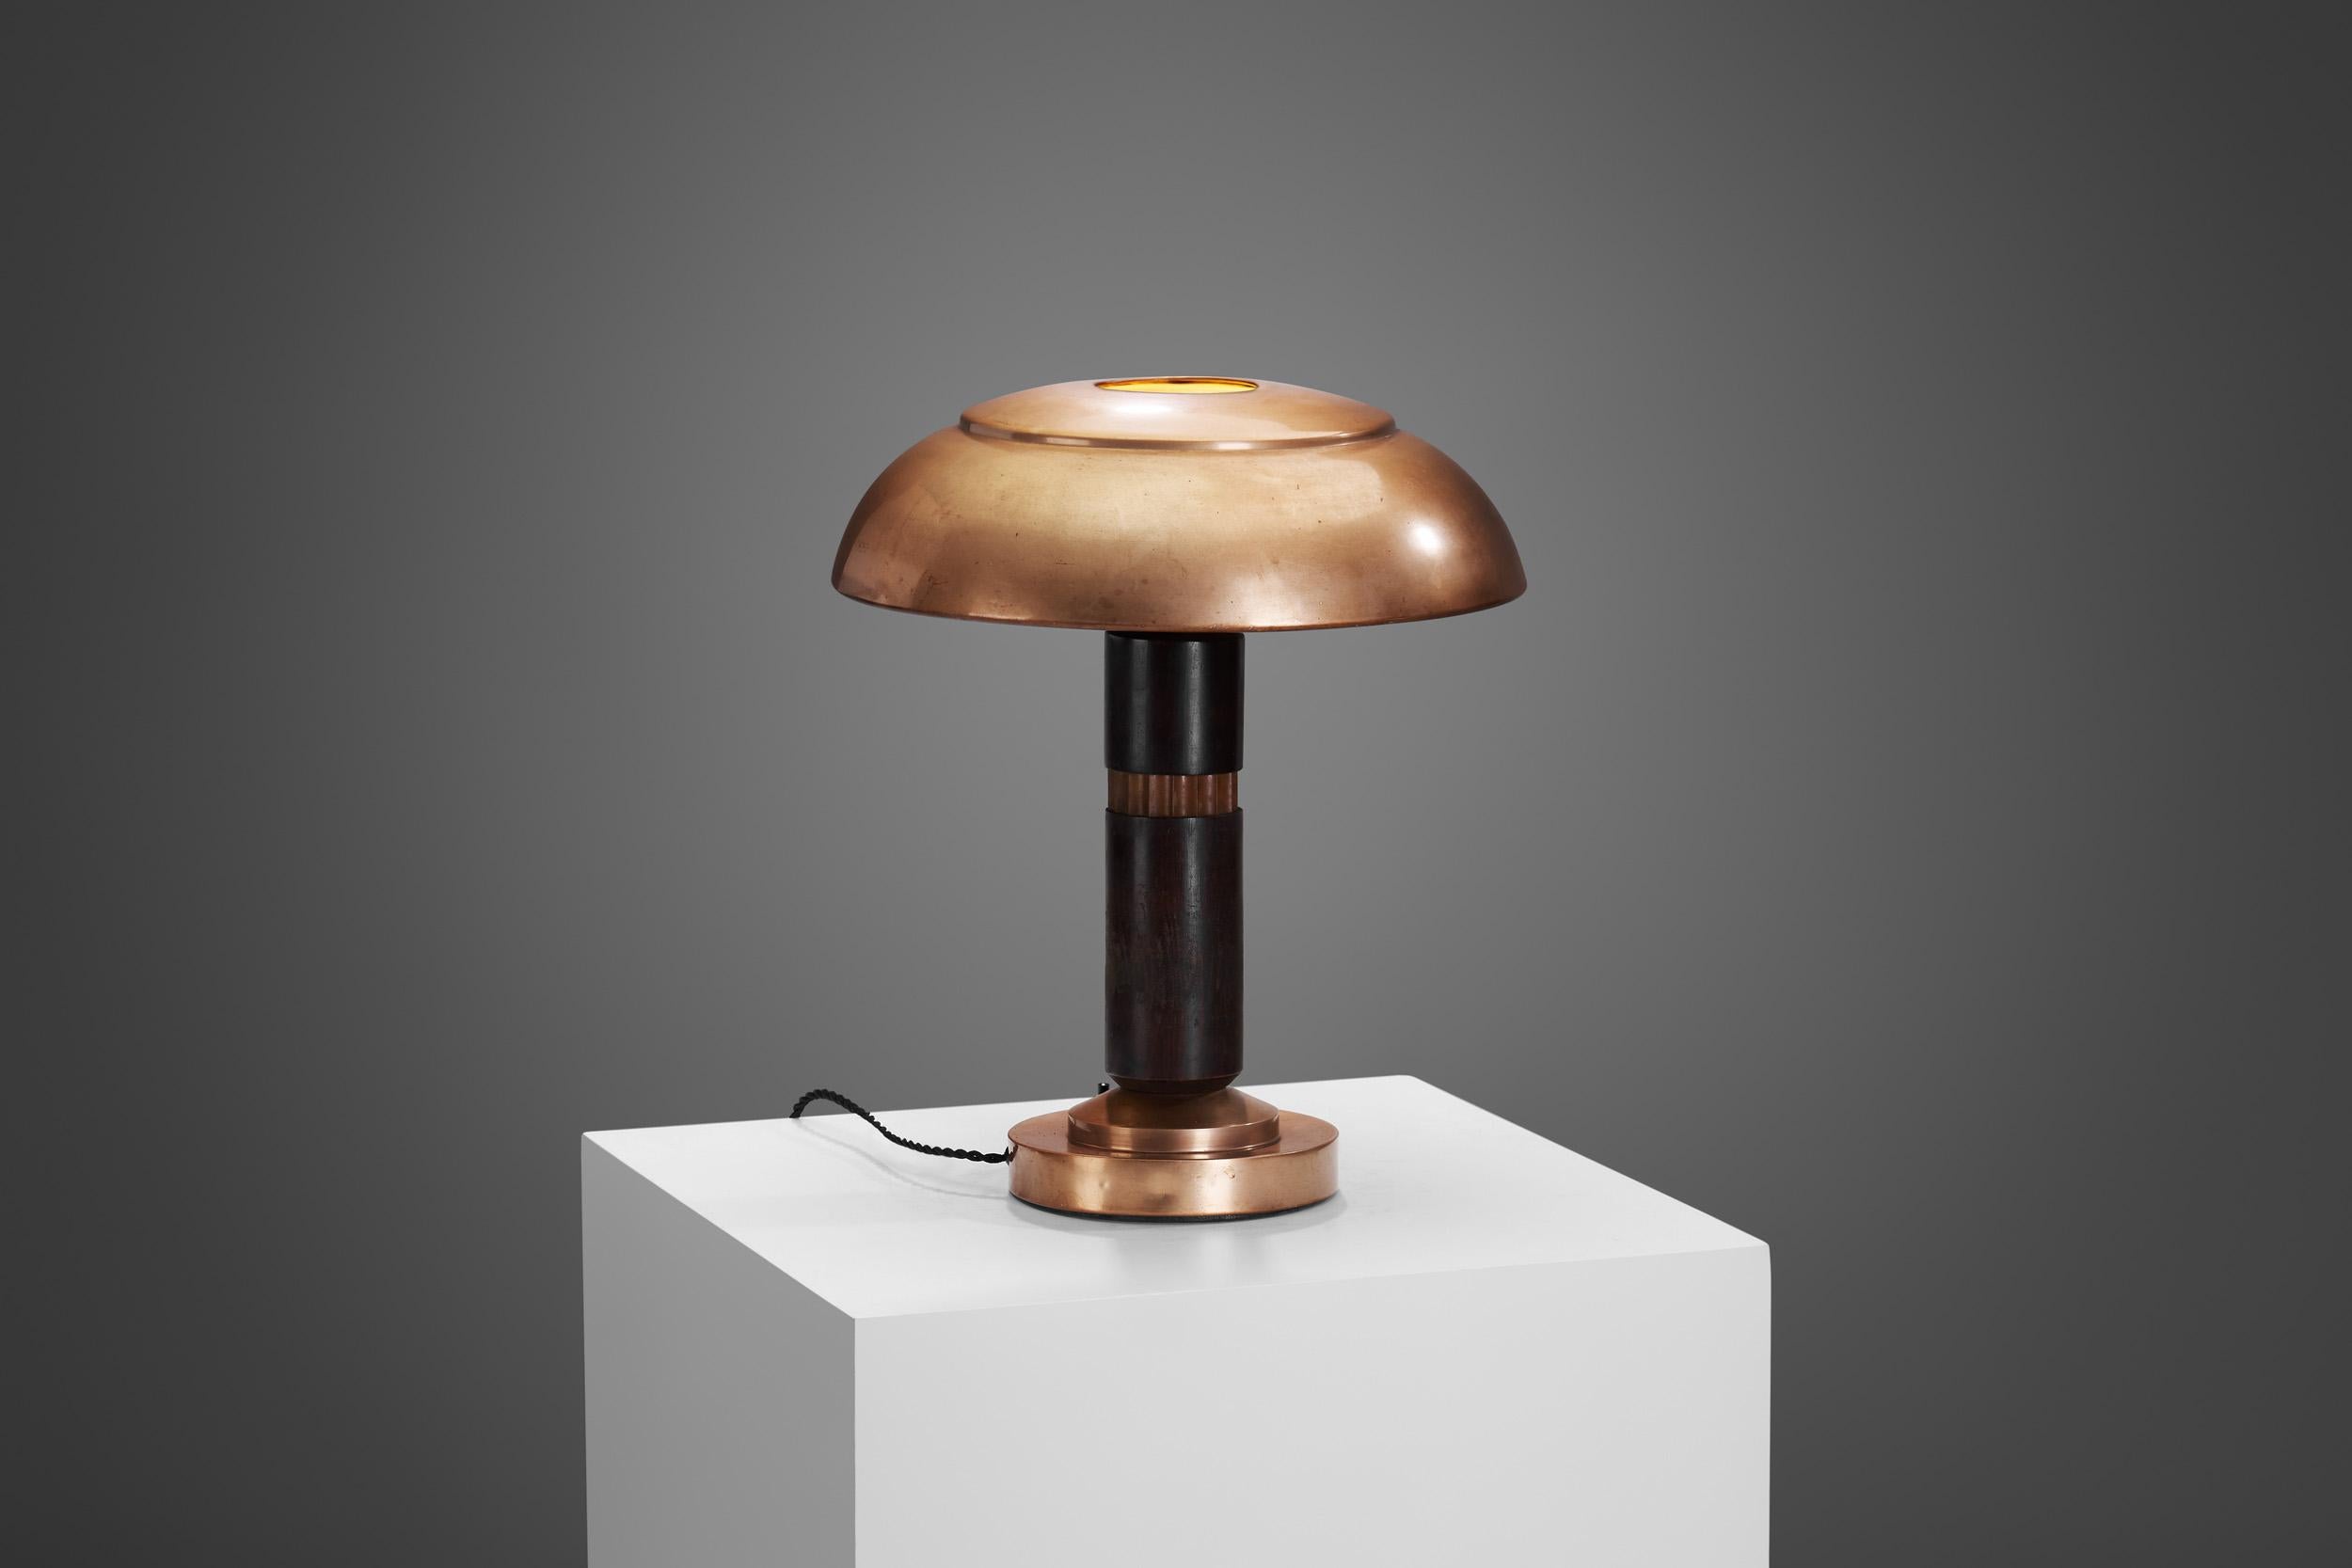 The European Art Deco movement of the 1930s was a beacon of innovation and style, and one of its timeless creations was this copper and wood table lamp. This exquisite piece of functional art epitomizes the elegance and sophistication that